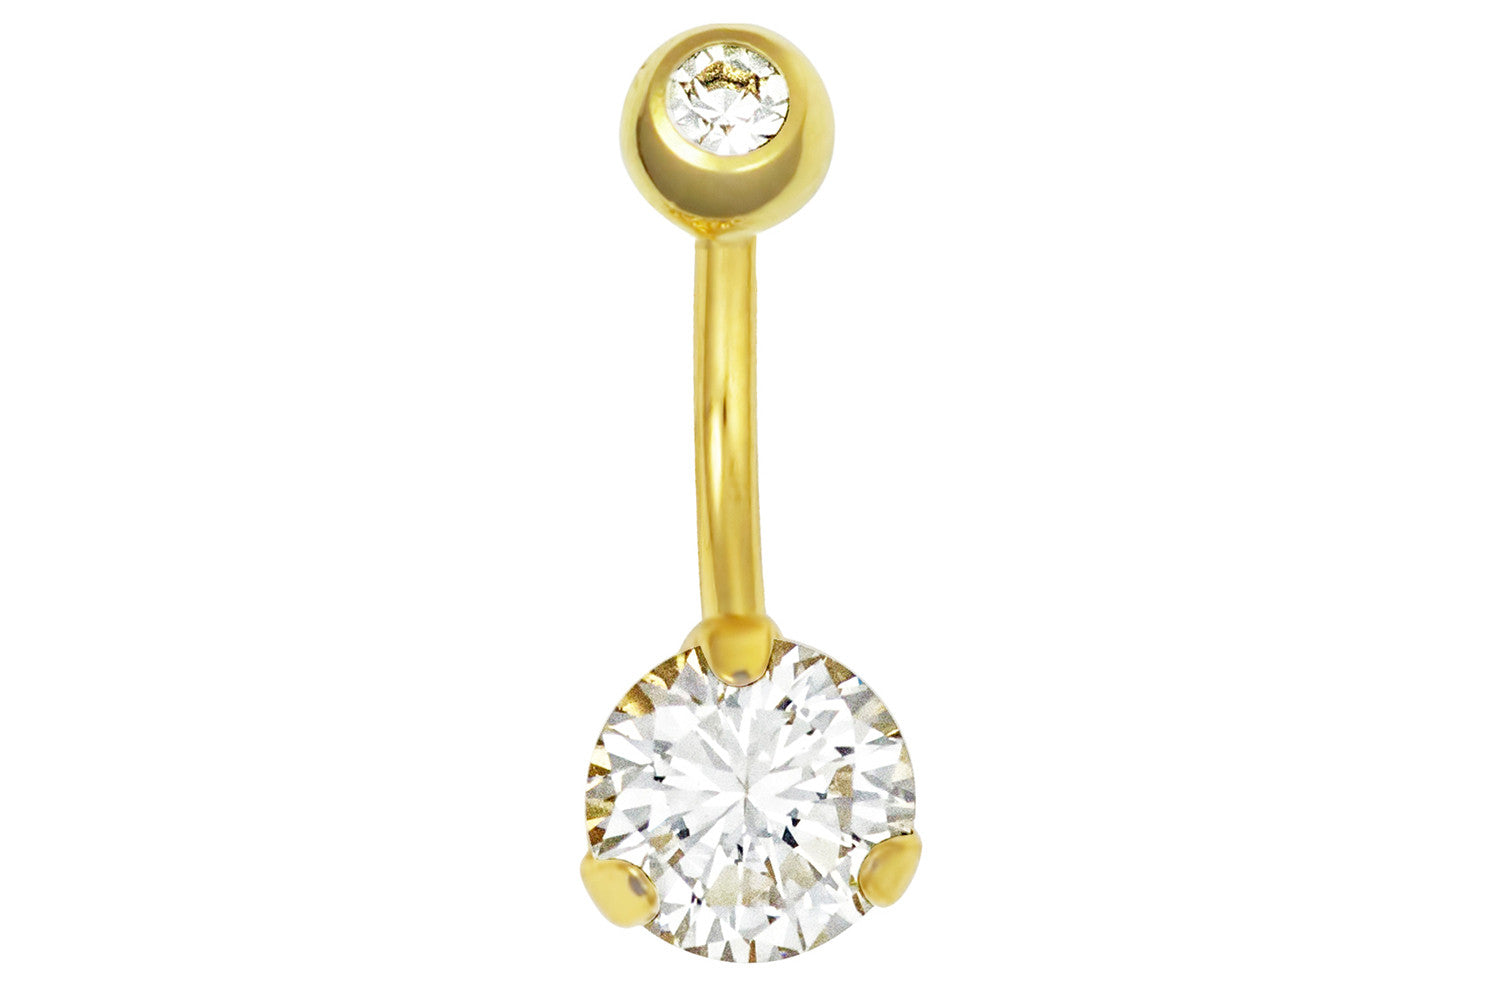 14kt Gold Plated Surgical Steel Double Jeweled Cubic Zirconia Crystal Belly Ring